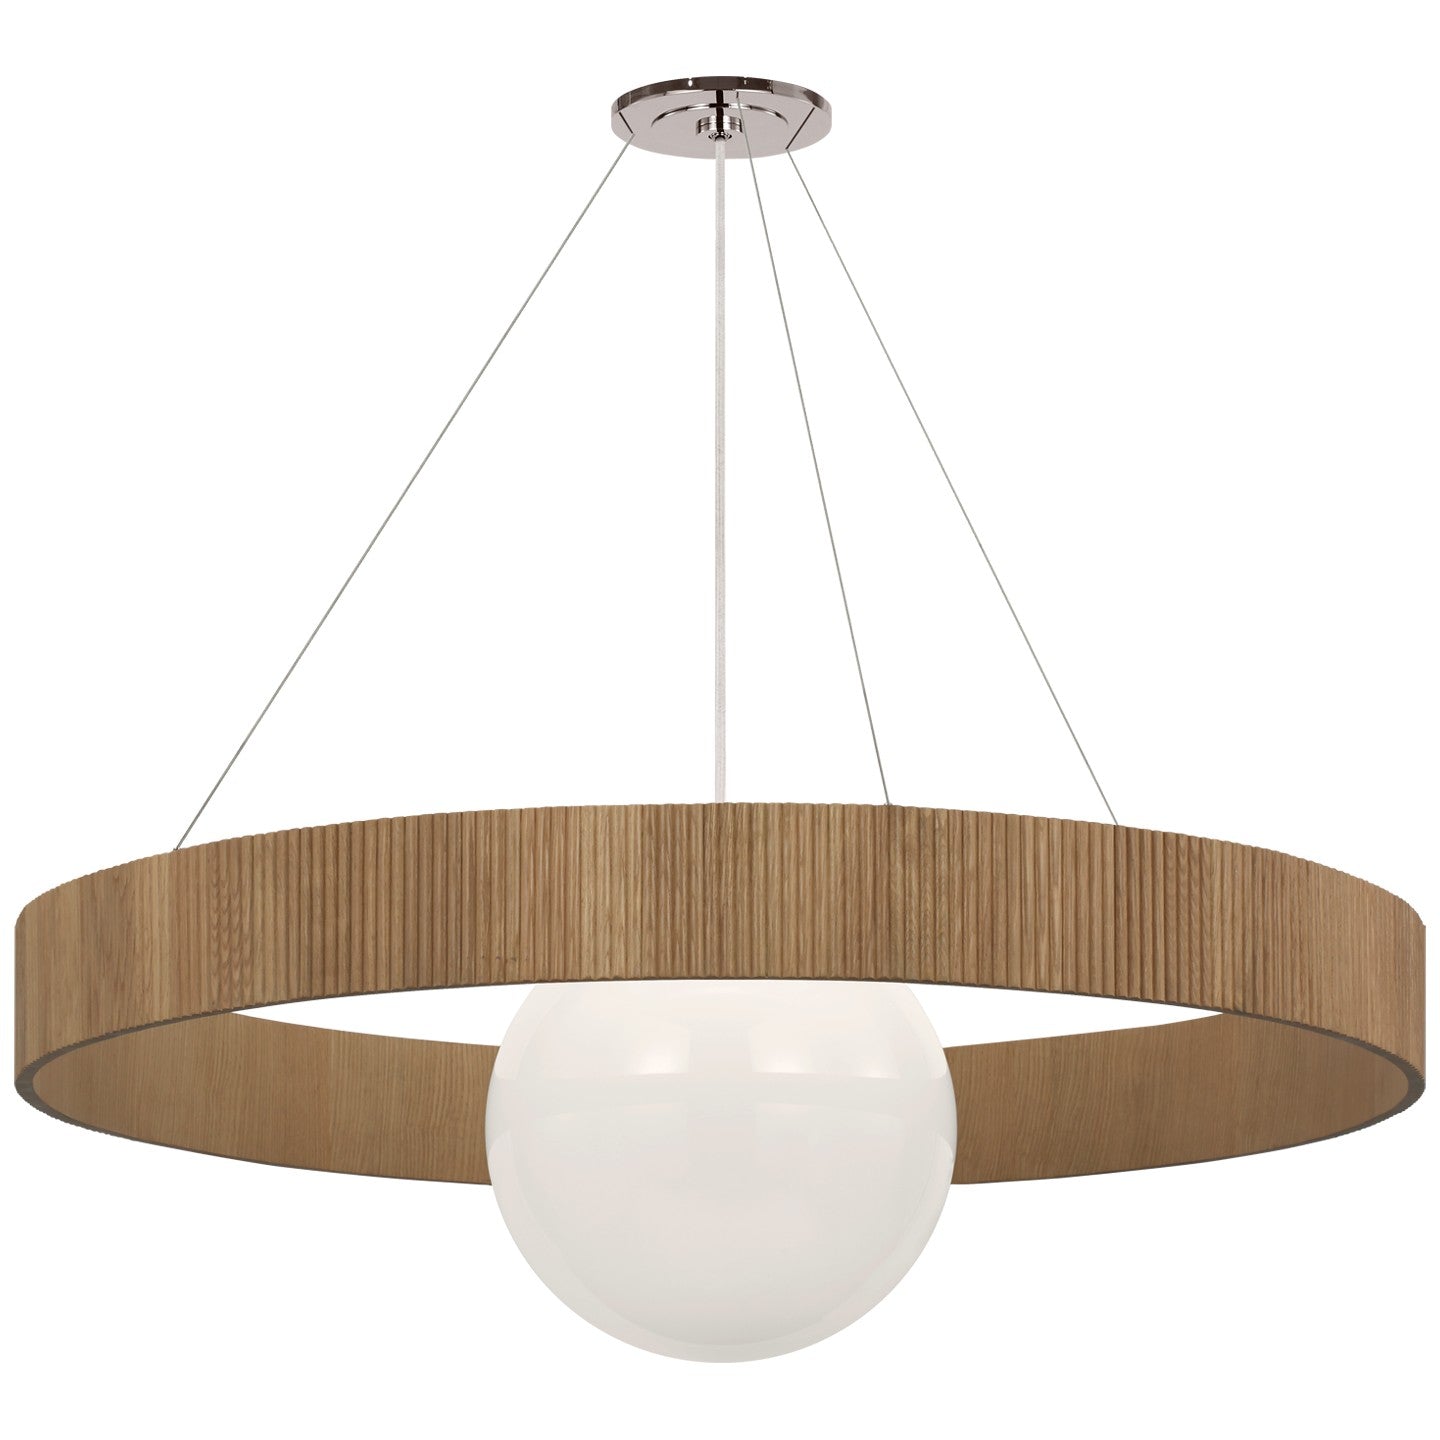 Visual Comfort Signature - WS 5002PN/NO-WG - LED Chandelier - Arena - Polished Nickel and White Glass